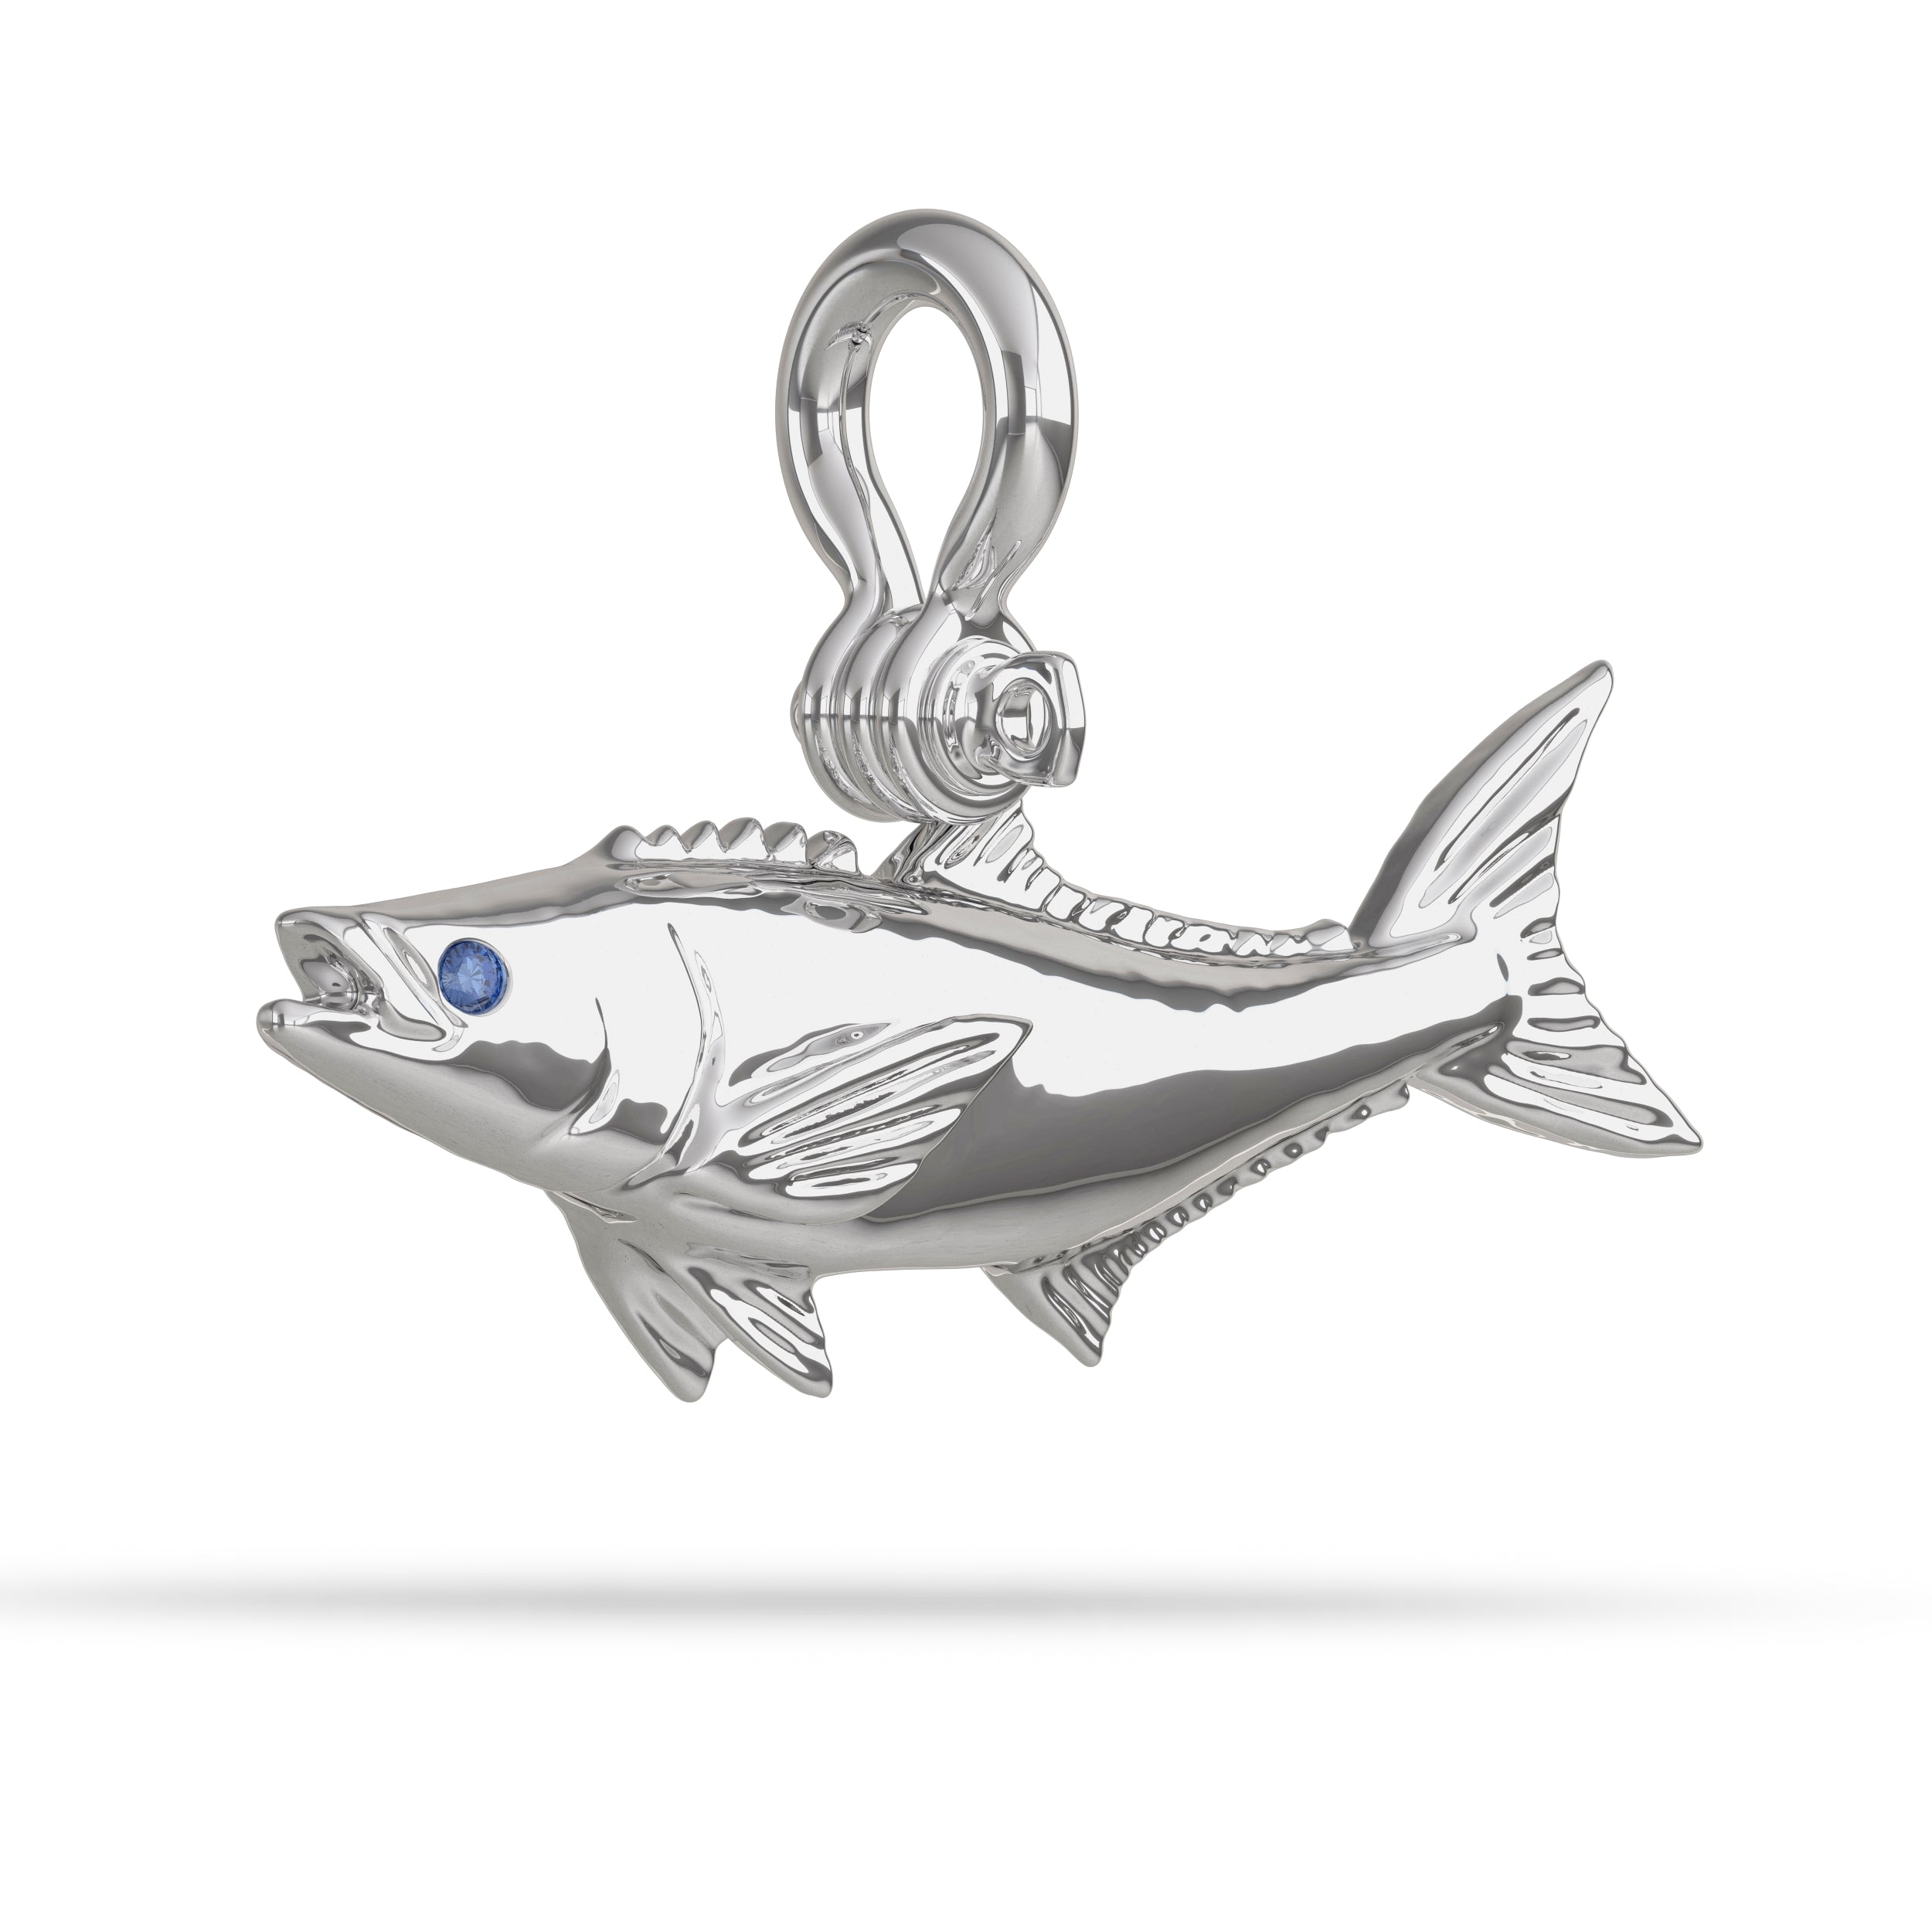 Sterling Silver Cobia Pendant High Polished Mirror Finish With Blue Sapphire Eye with A Mariner Shackle Bail Custom Designed By Nautical Treasure Jewelry In The Florida Keys Offshore Fishing